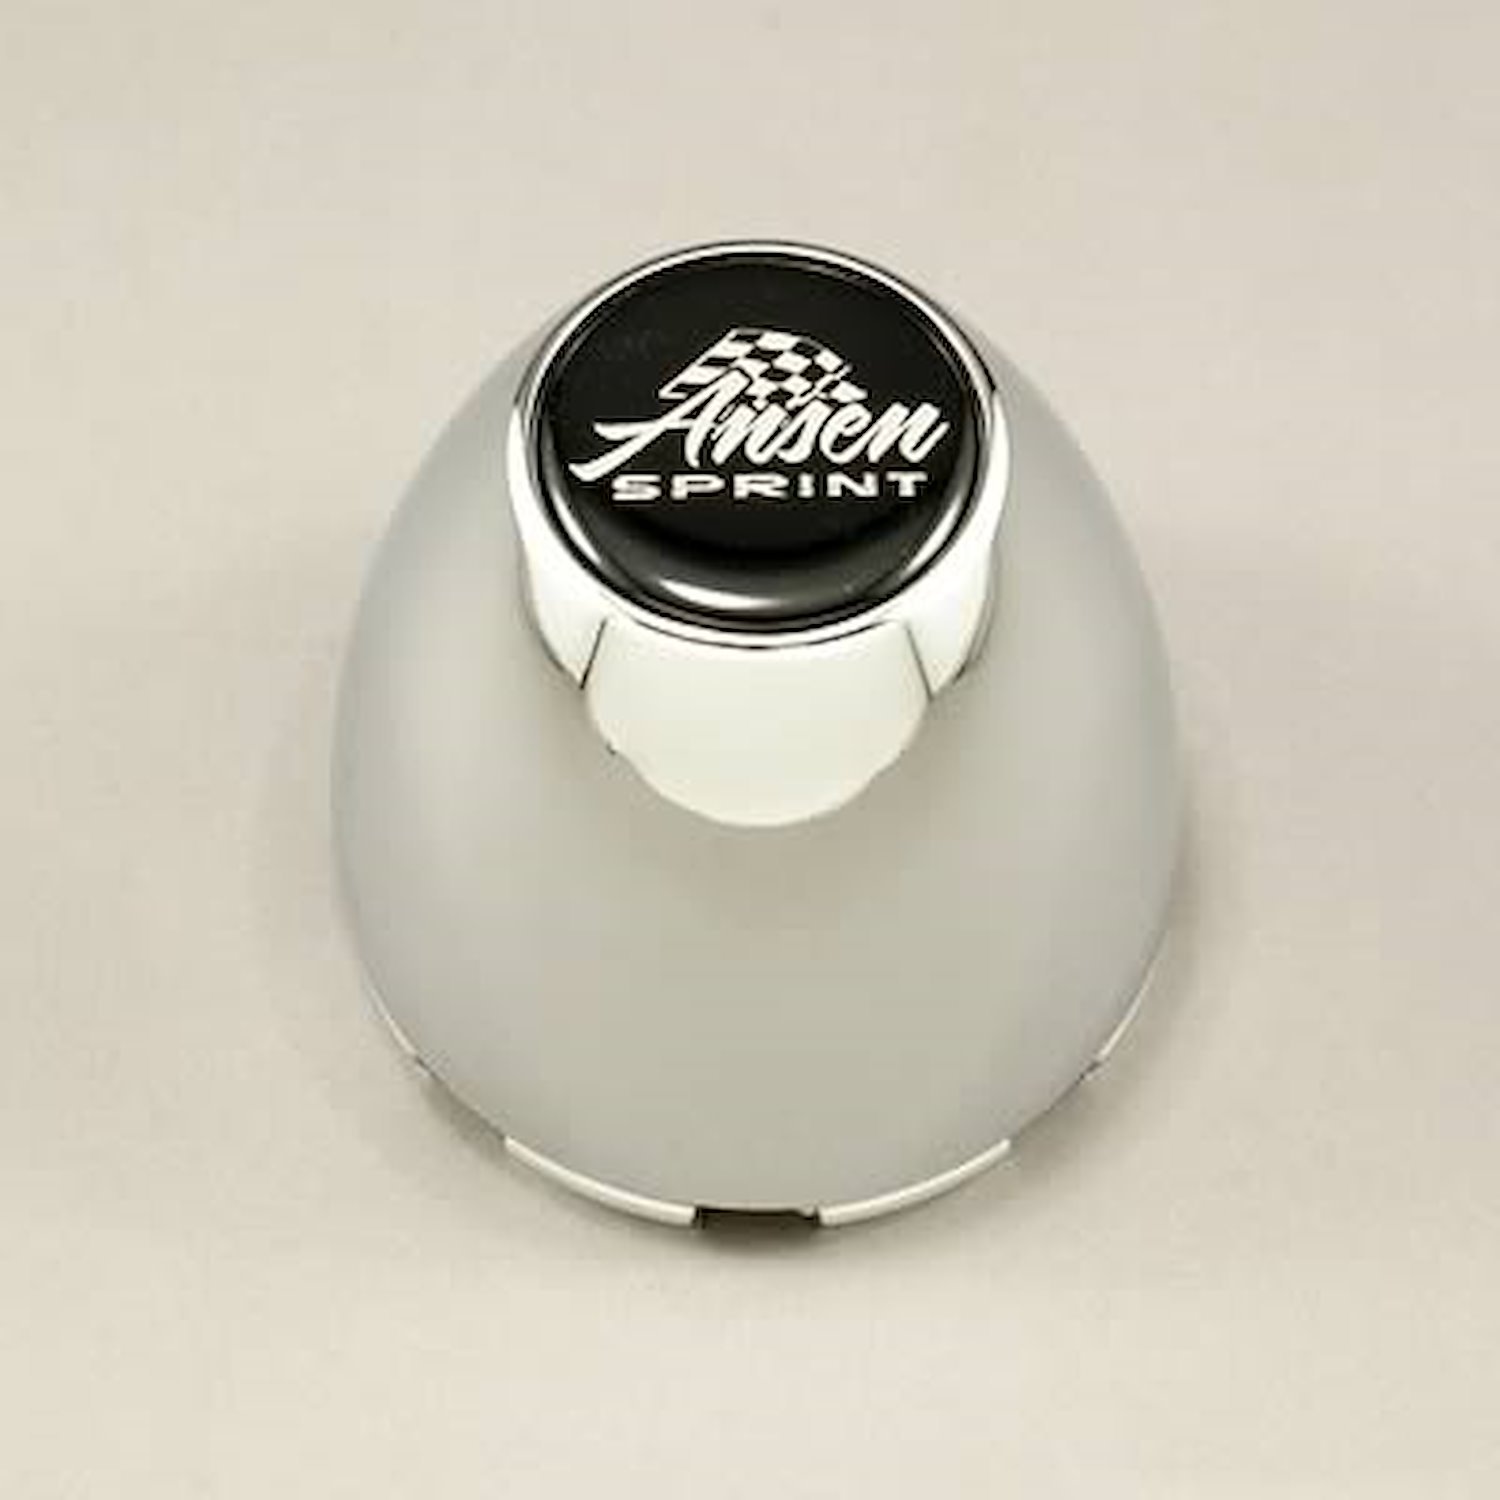 American Racing 1328100099: Center Cap Fits Ansen Wheels w/5 x 4.5", 5 x  4.75" and 5 x 5" Bolt Circles - JEGS